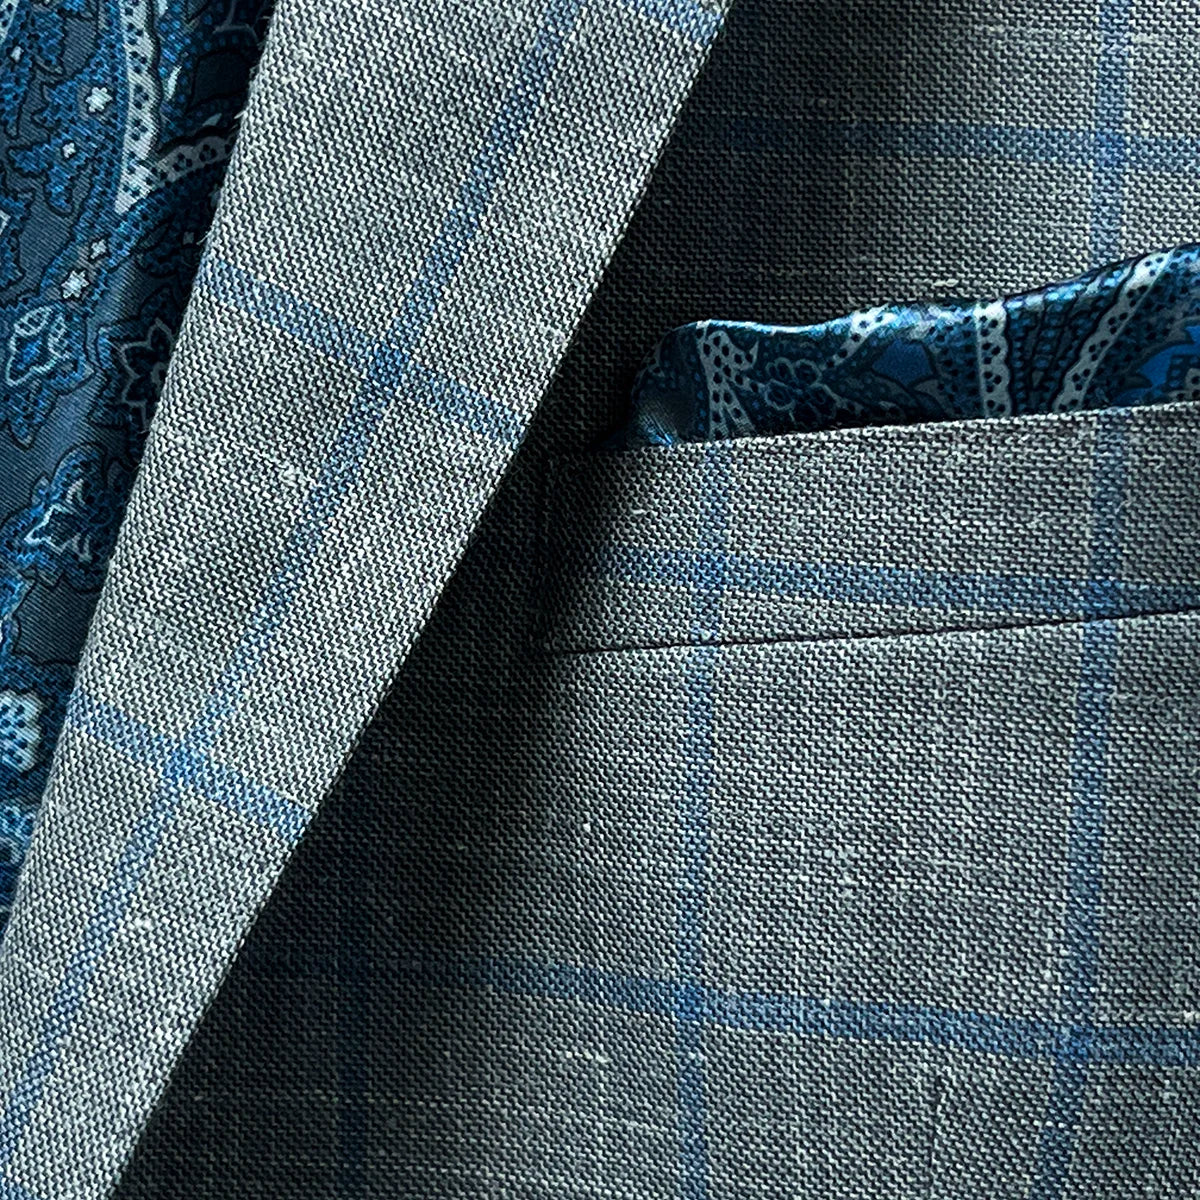 Close-up of the built-in pocket square feature on the Westwood Hart grey with medium blue windowpane men's sport coat.